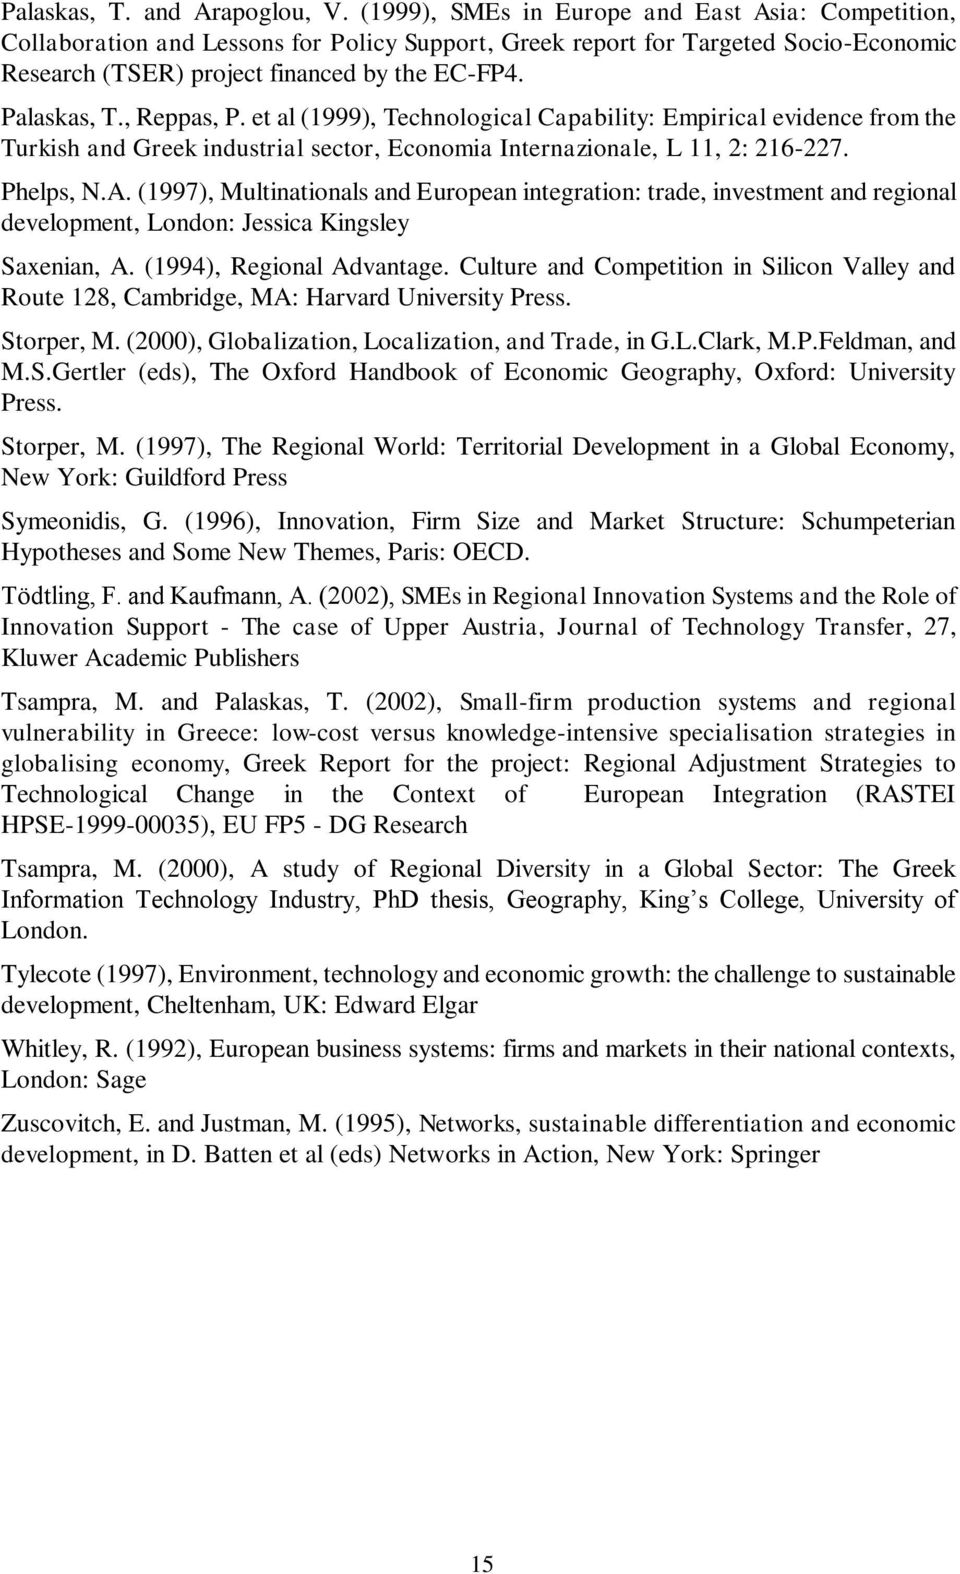 , Reppas, P. et al (1999), Technological Capability: Empirical evidence from the Turkish and Greek industrial sector, Economia Internazionale, L 11, 2: 216-227. Phelps, N.A.